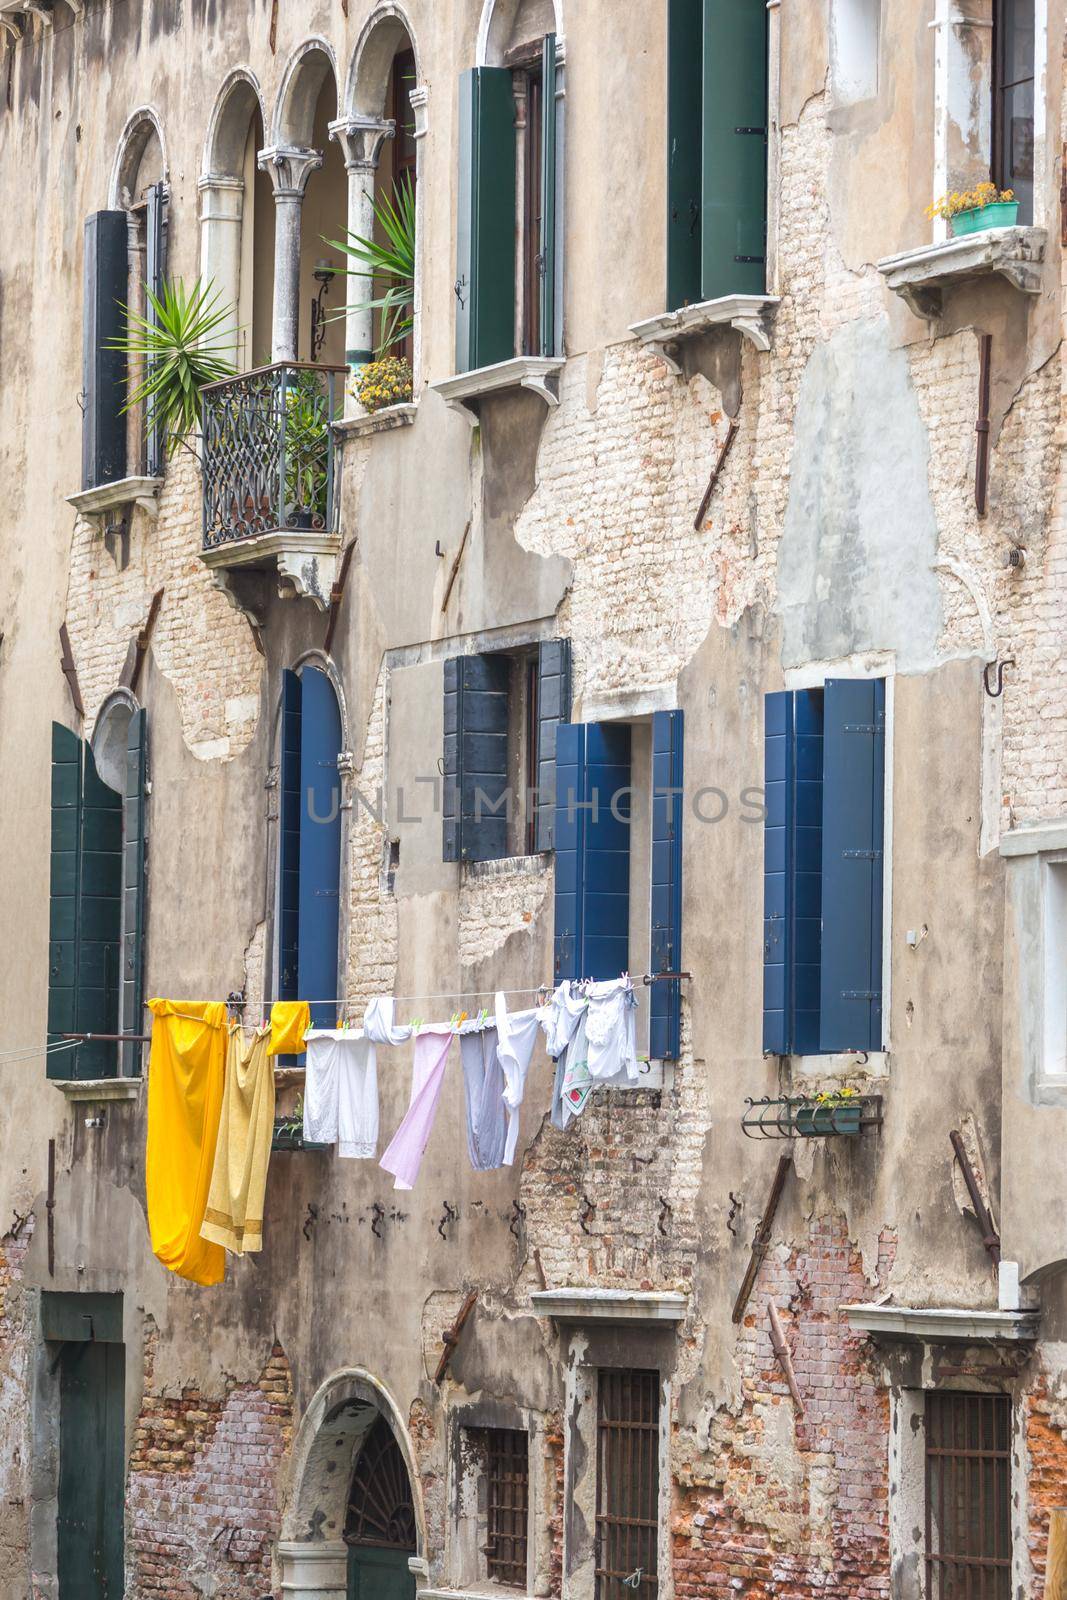 Clothes drying hanging high in Venice Italy by Mariakray